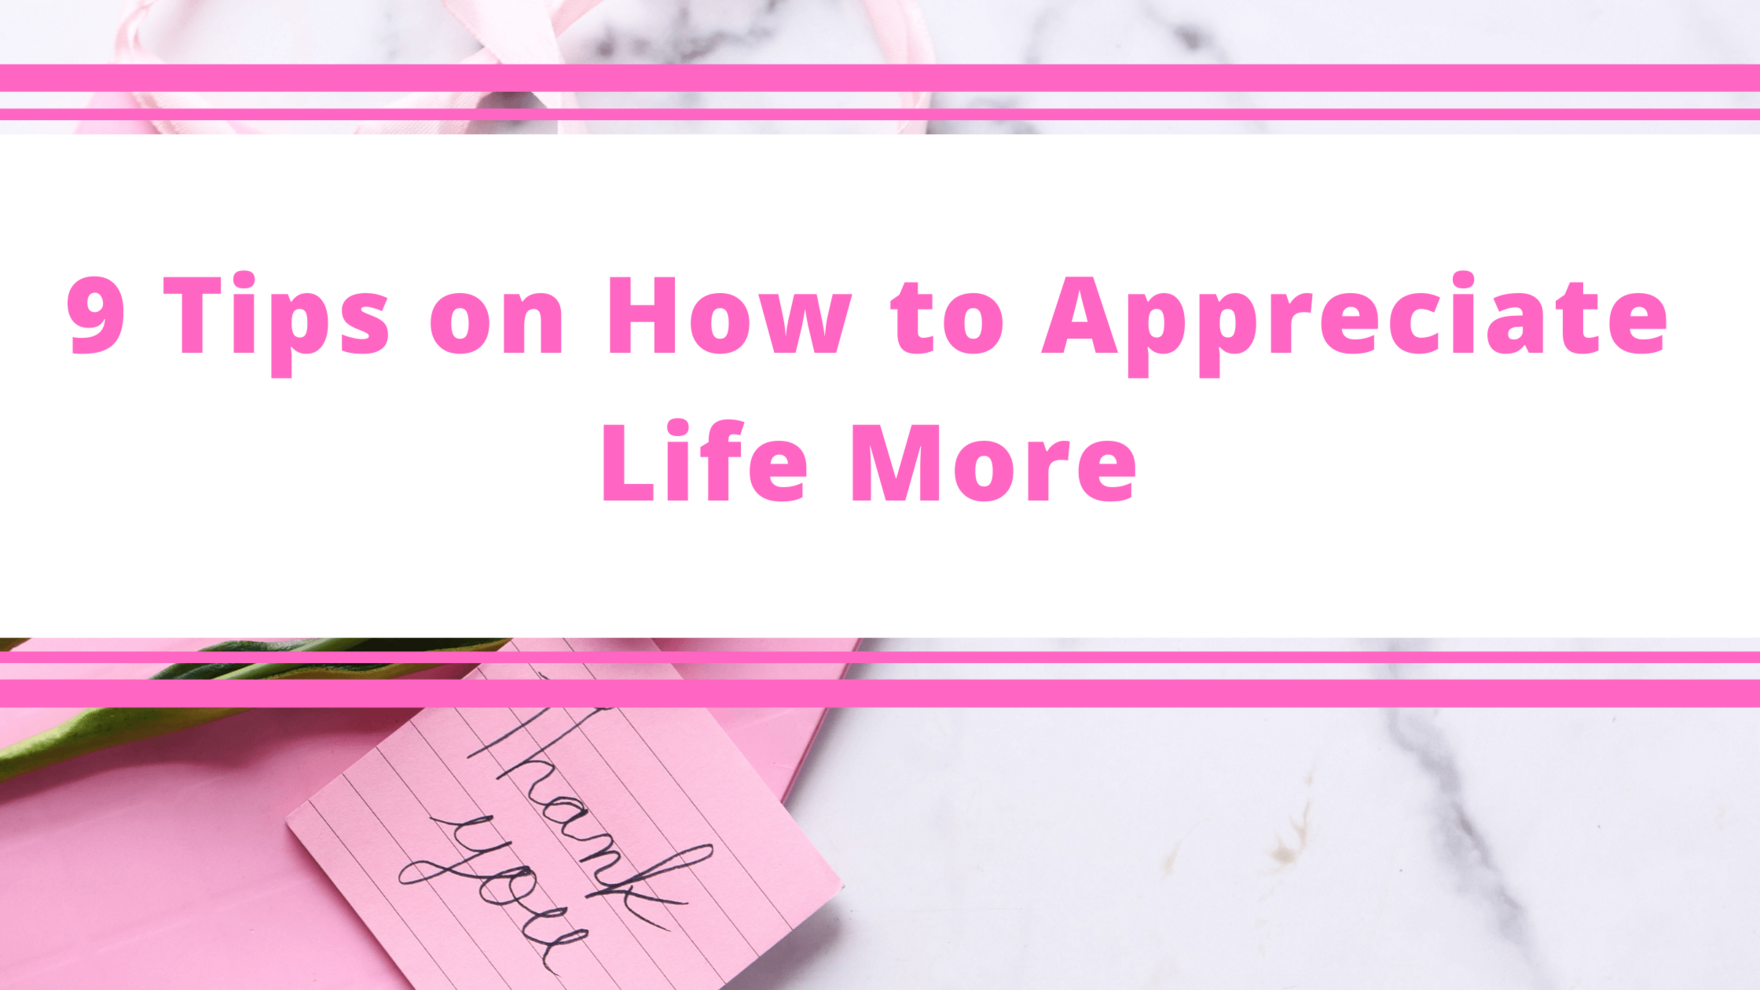 Top Tips Blog - 9 Tips on How to Appreciate Life More